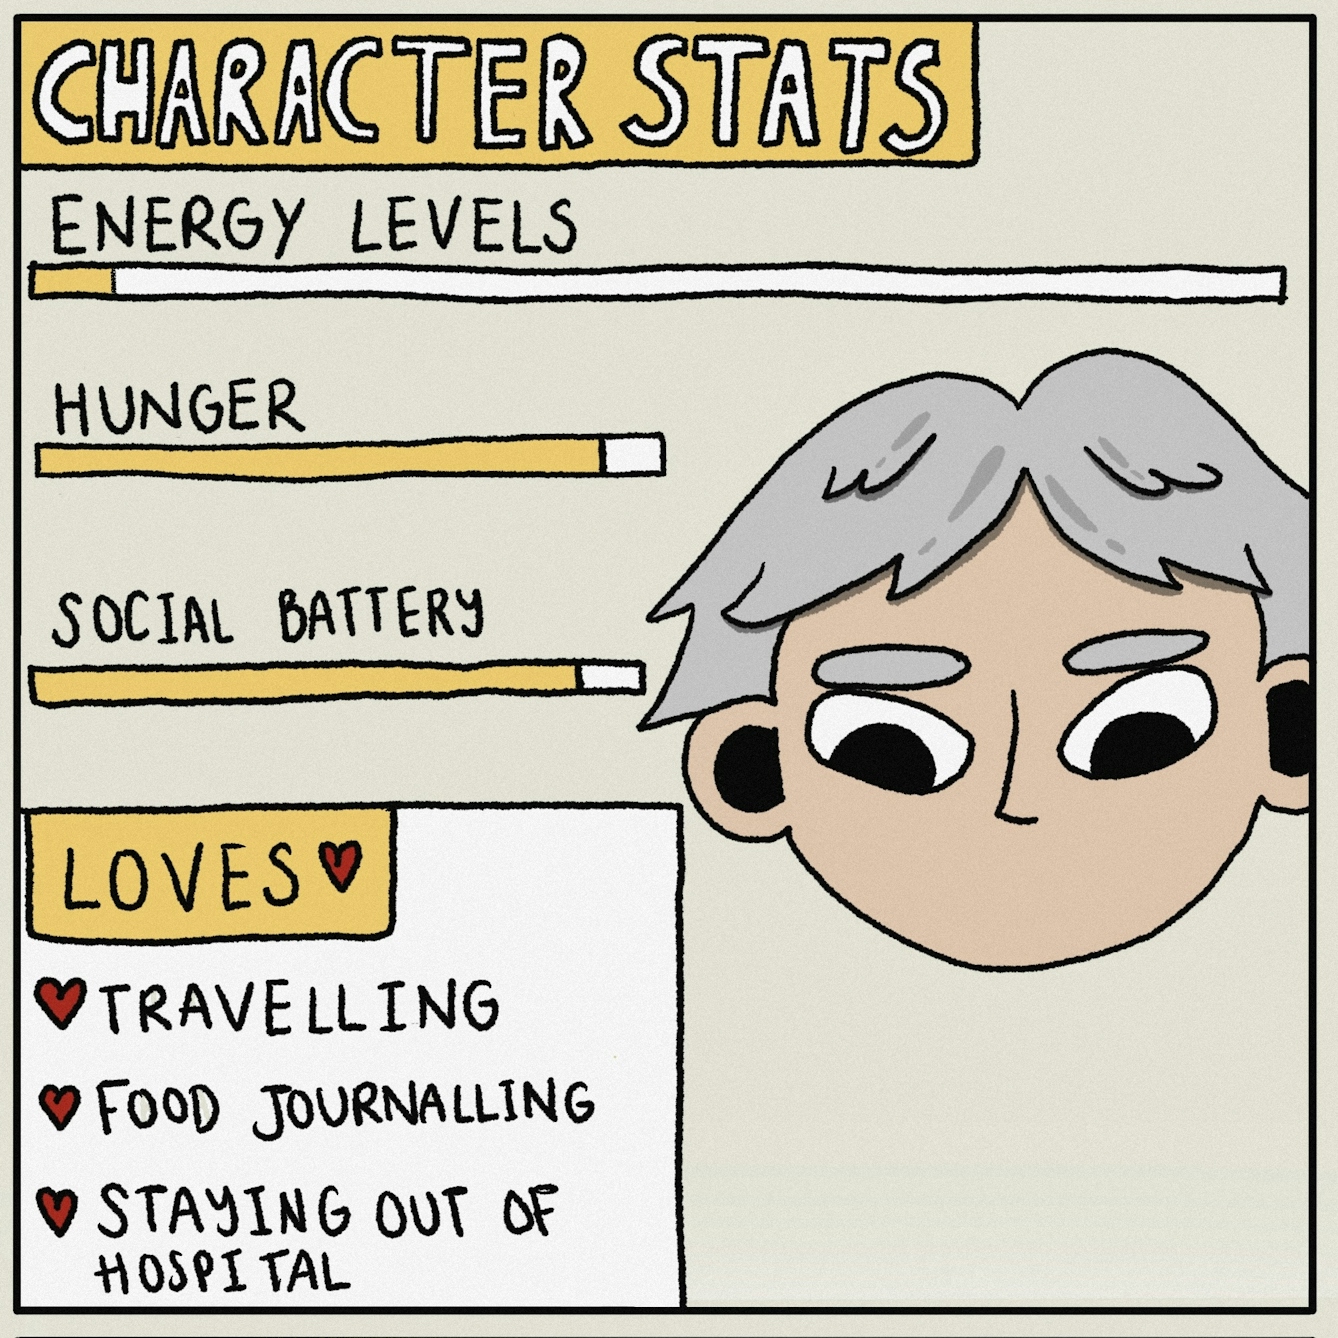 Panel 2 of a digitally drawn, four-panel comic titled ‘Ragequit’. The text at the top says ‘CHARACTER STATS’. The sliders show your character has low energy but high hunger and social battery levels. They also love travelling, food journaling and staying out of hospital. 